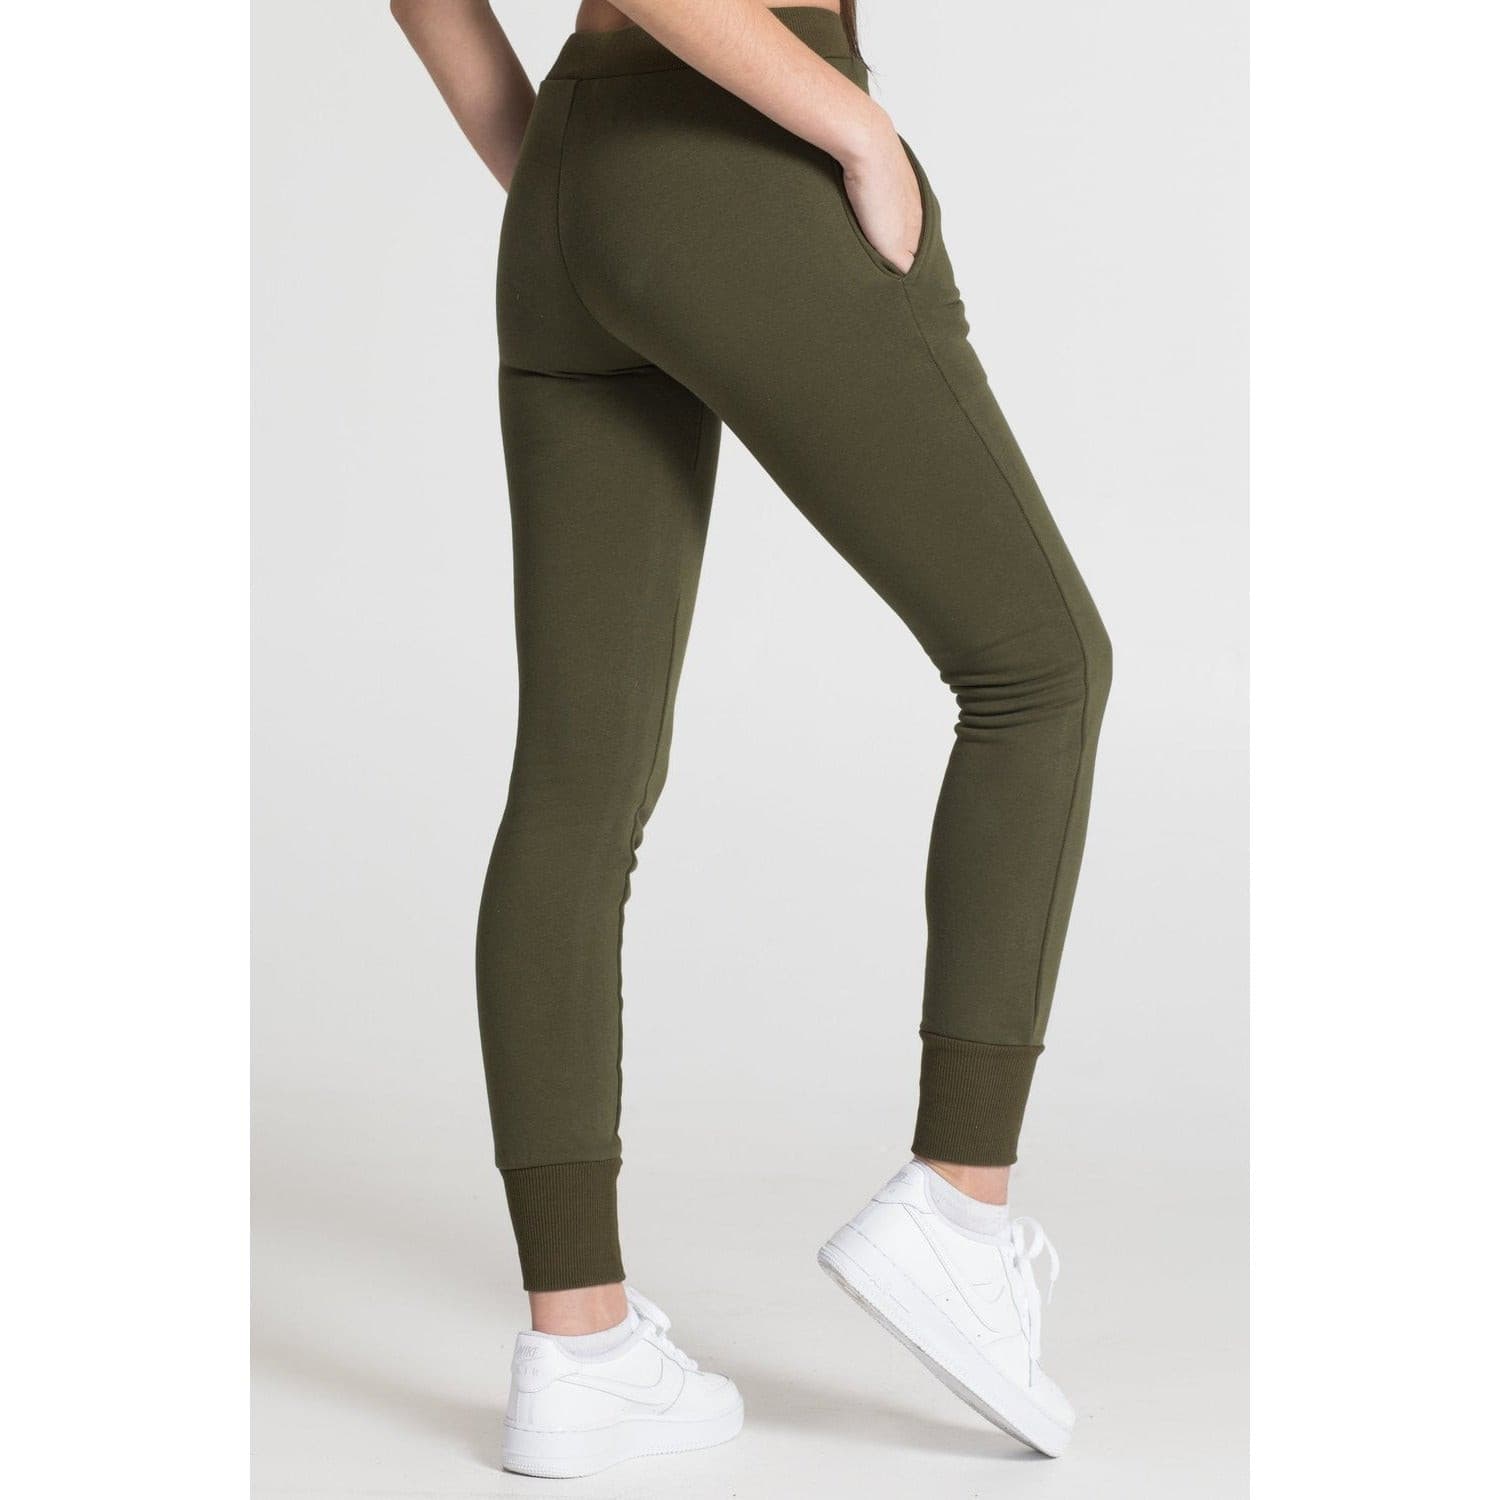 Olive joggers for women with pockets and elastic bottom